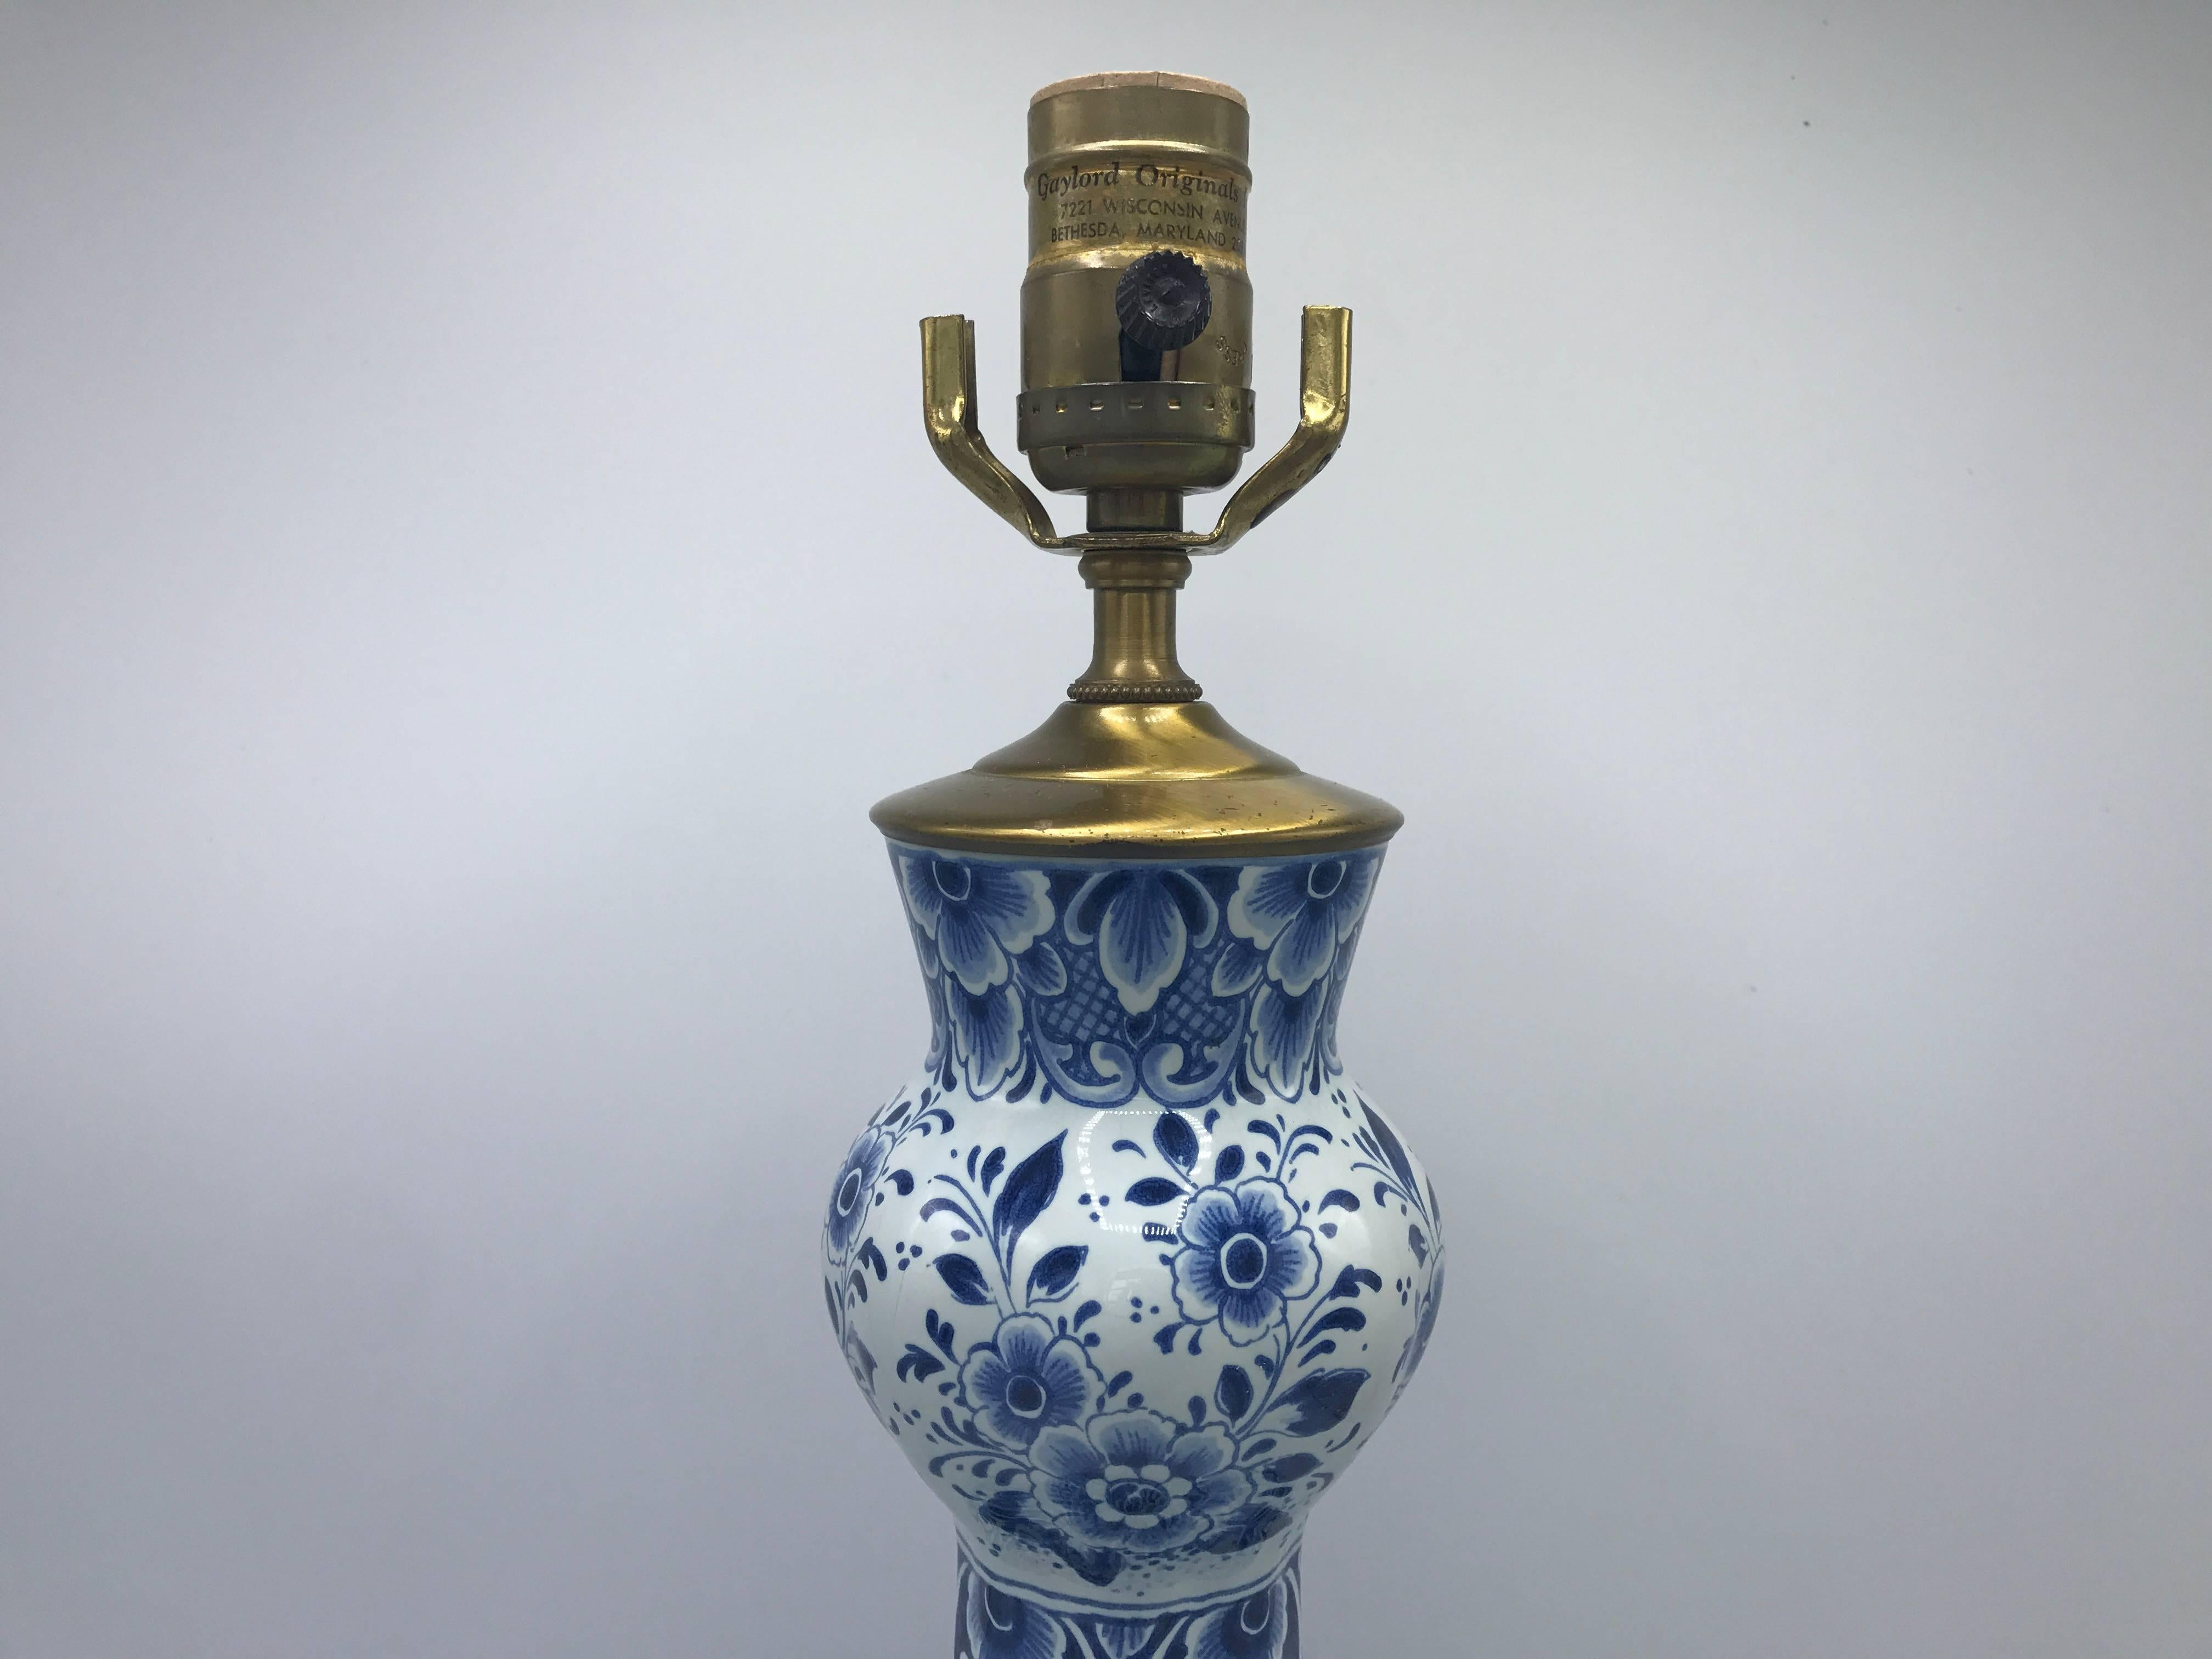 Offered is an exquisite, 19th century blue and white delft vase converted to a lamp with an all-around floral motif. Rested on a brushed brass base. New socket, wiring, and base.